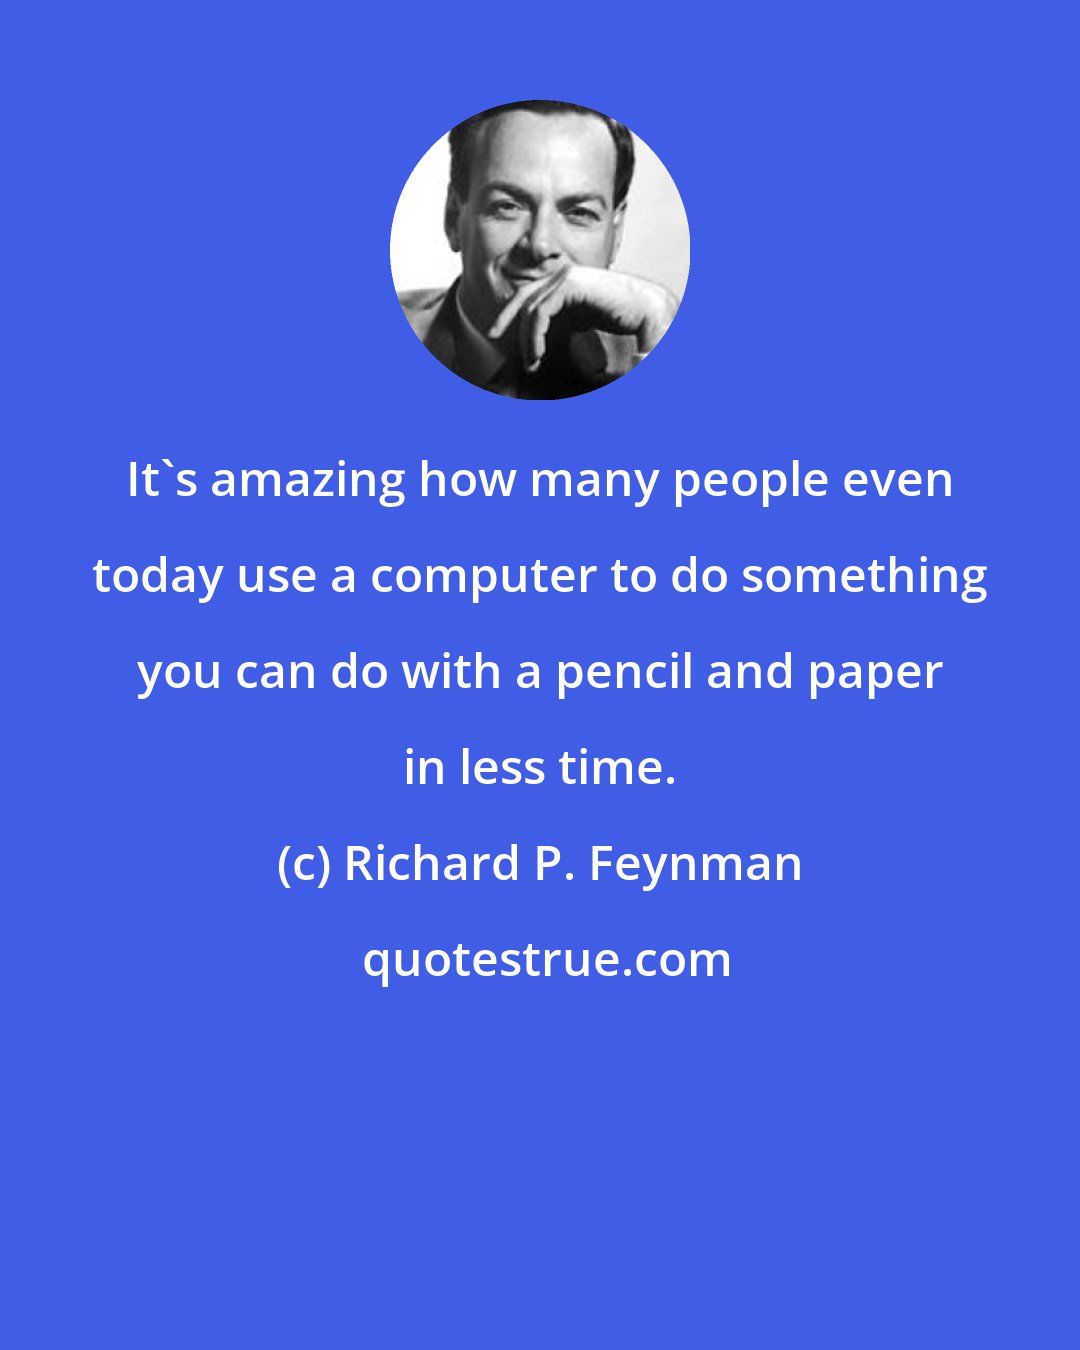 Richard P. Feynman: It's amazing how many people even today use a computer to do something you can do with a pencil and paper in less time.